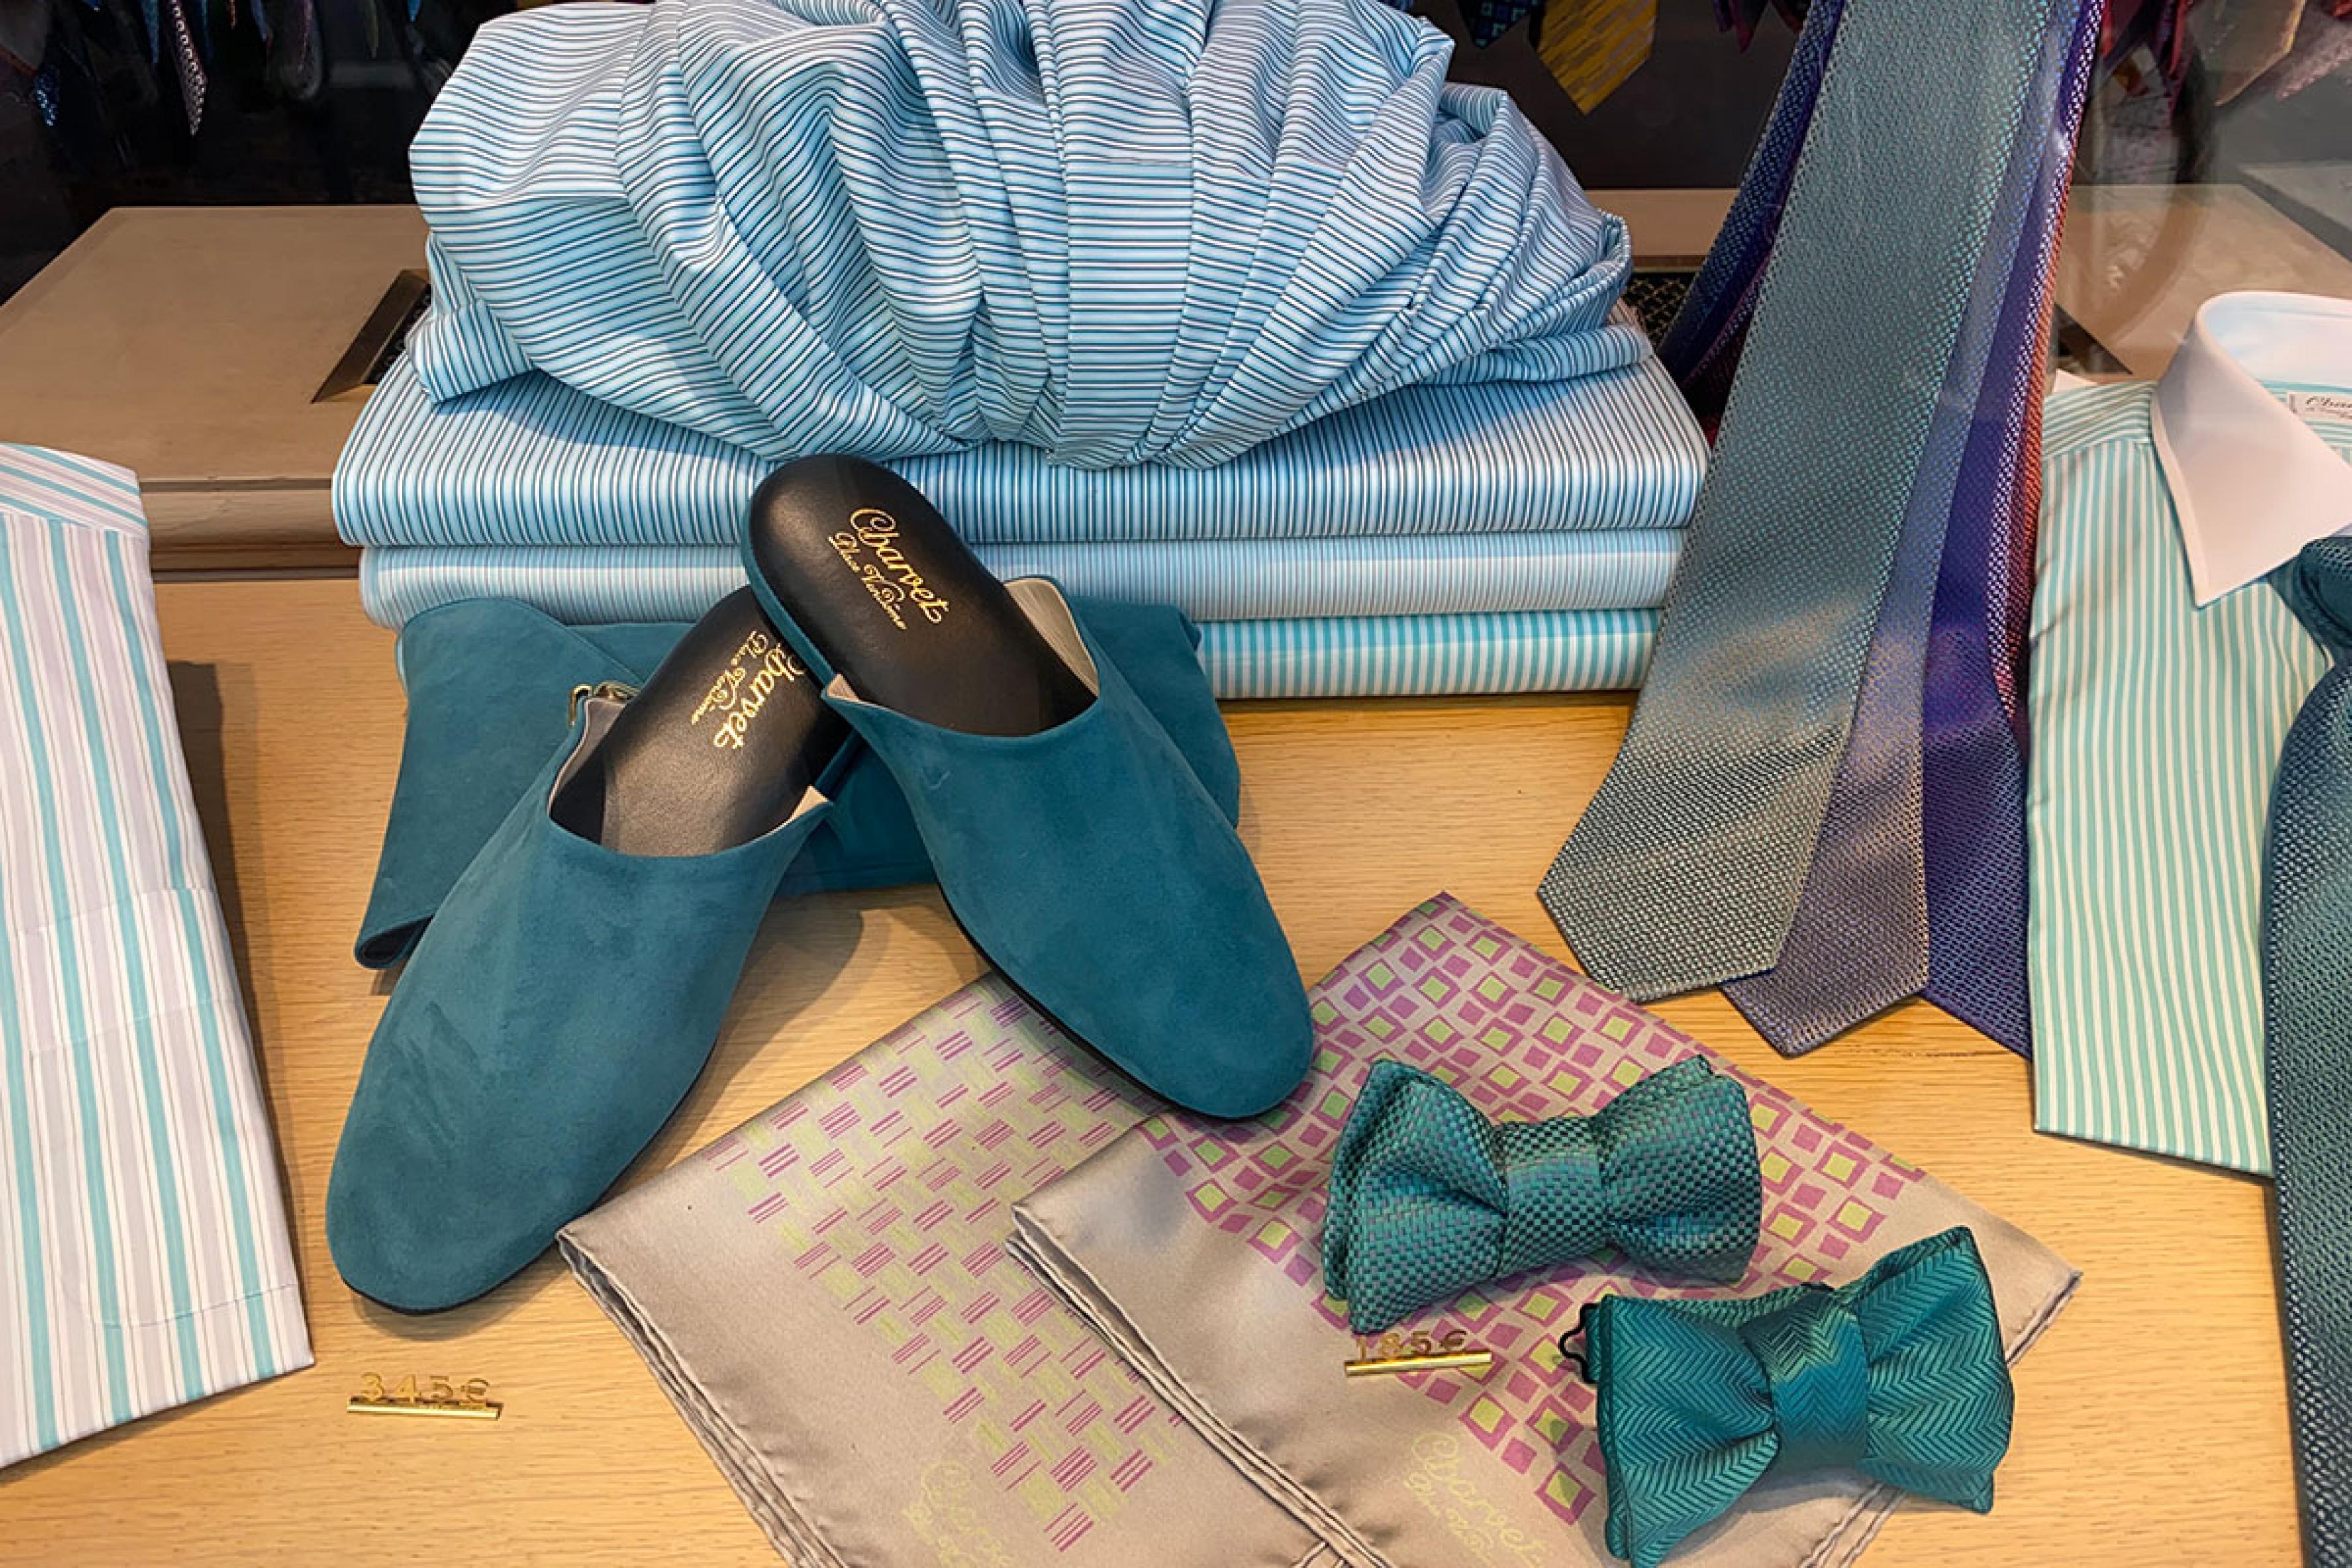 teal-blue bowties and matching shoes on display on a table in a boutique